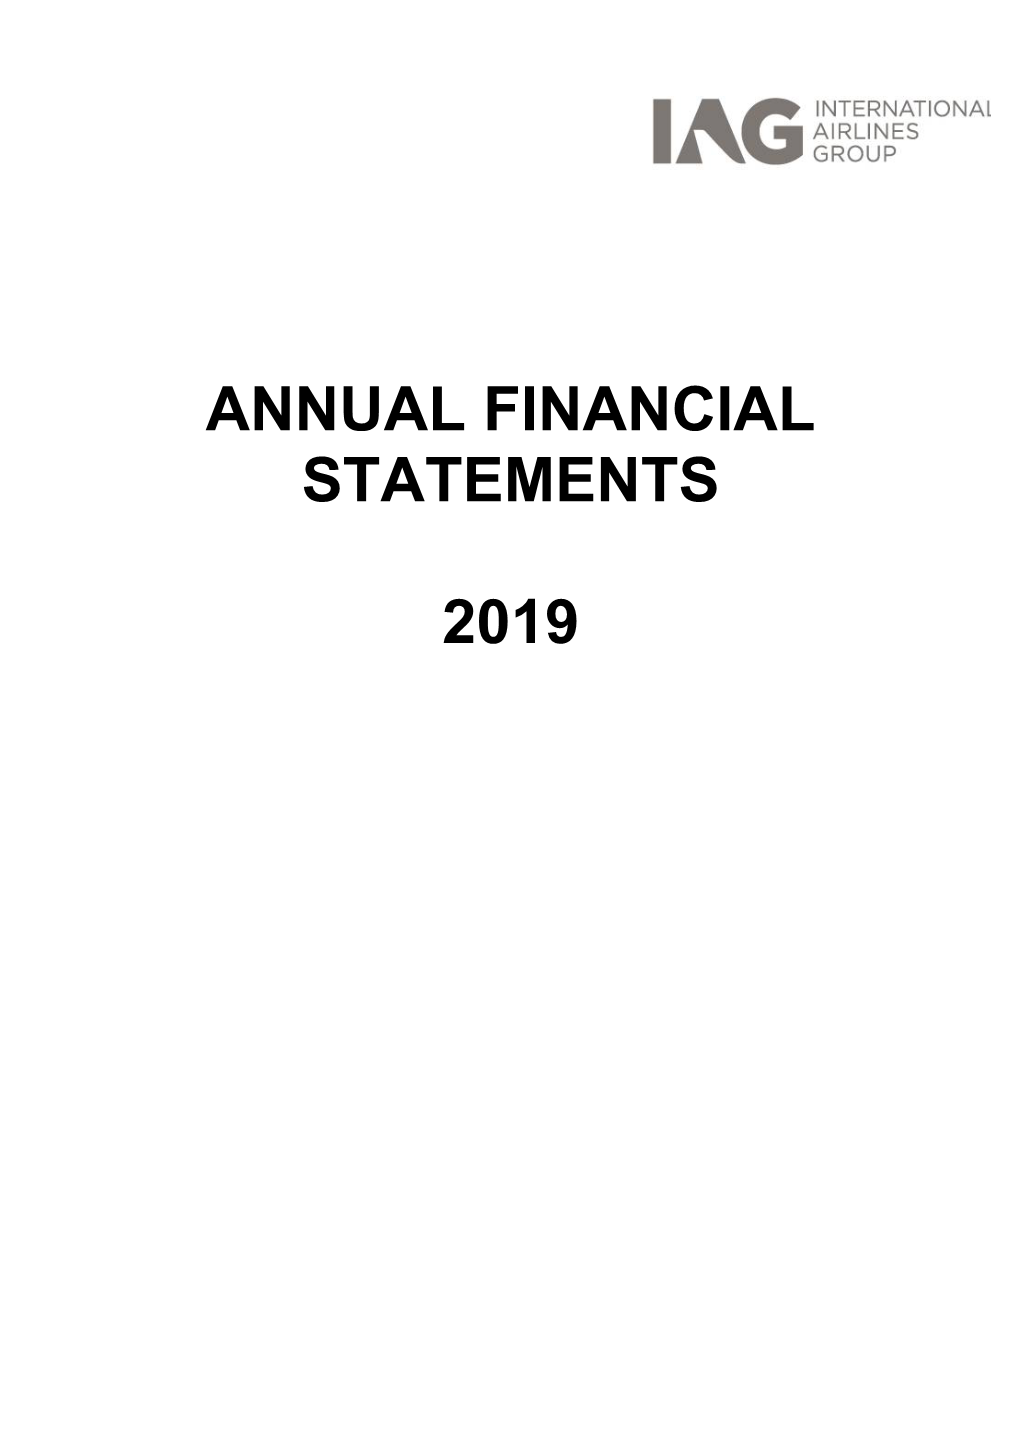 Annual Financial Statements 2019